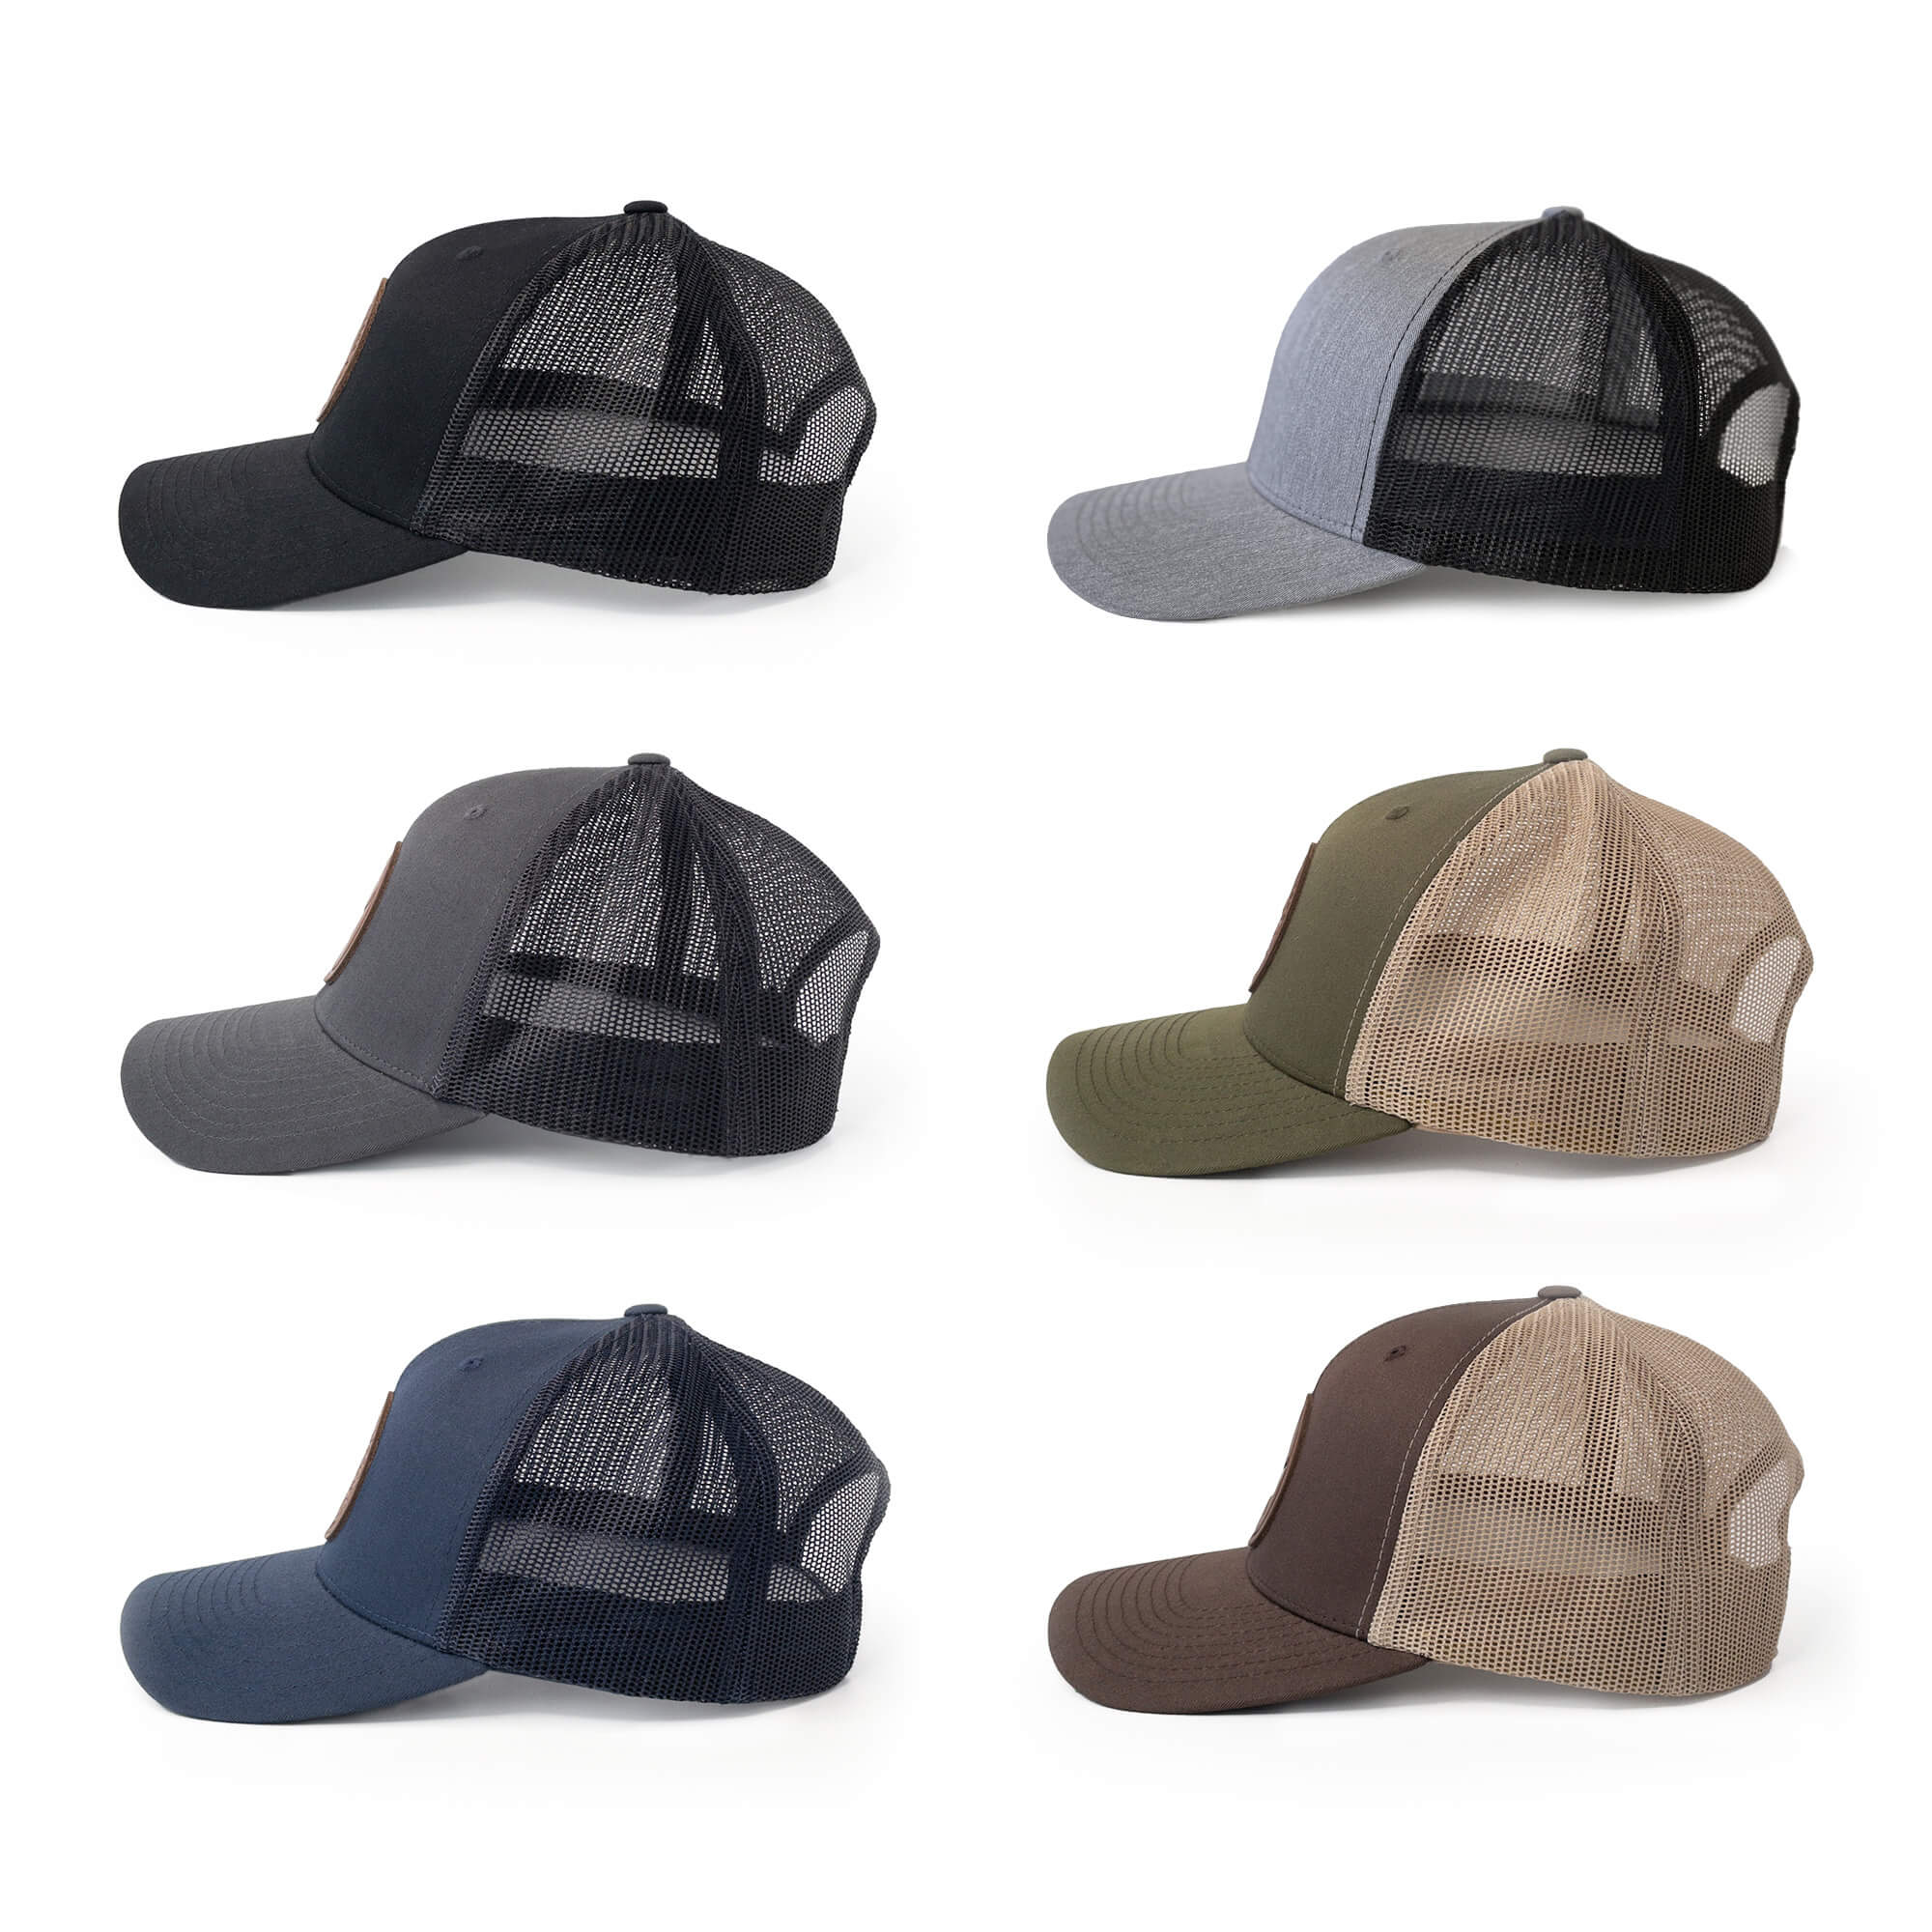 Leather patch trucker hats available in 6 colors | BLACK-002-009, CHARC-002-009, NAVY-002-009, HGREY-002-009, MOSS-002-009, BROWN-002-009